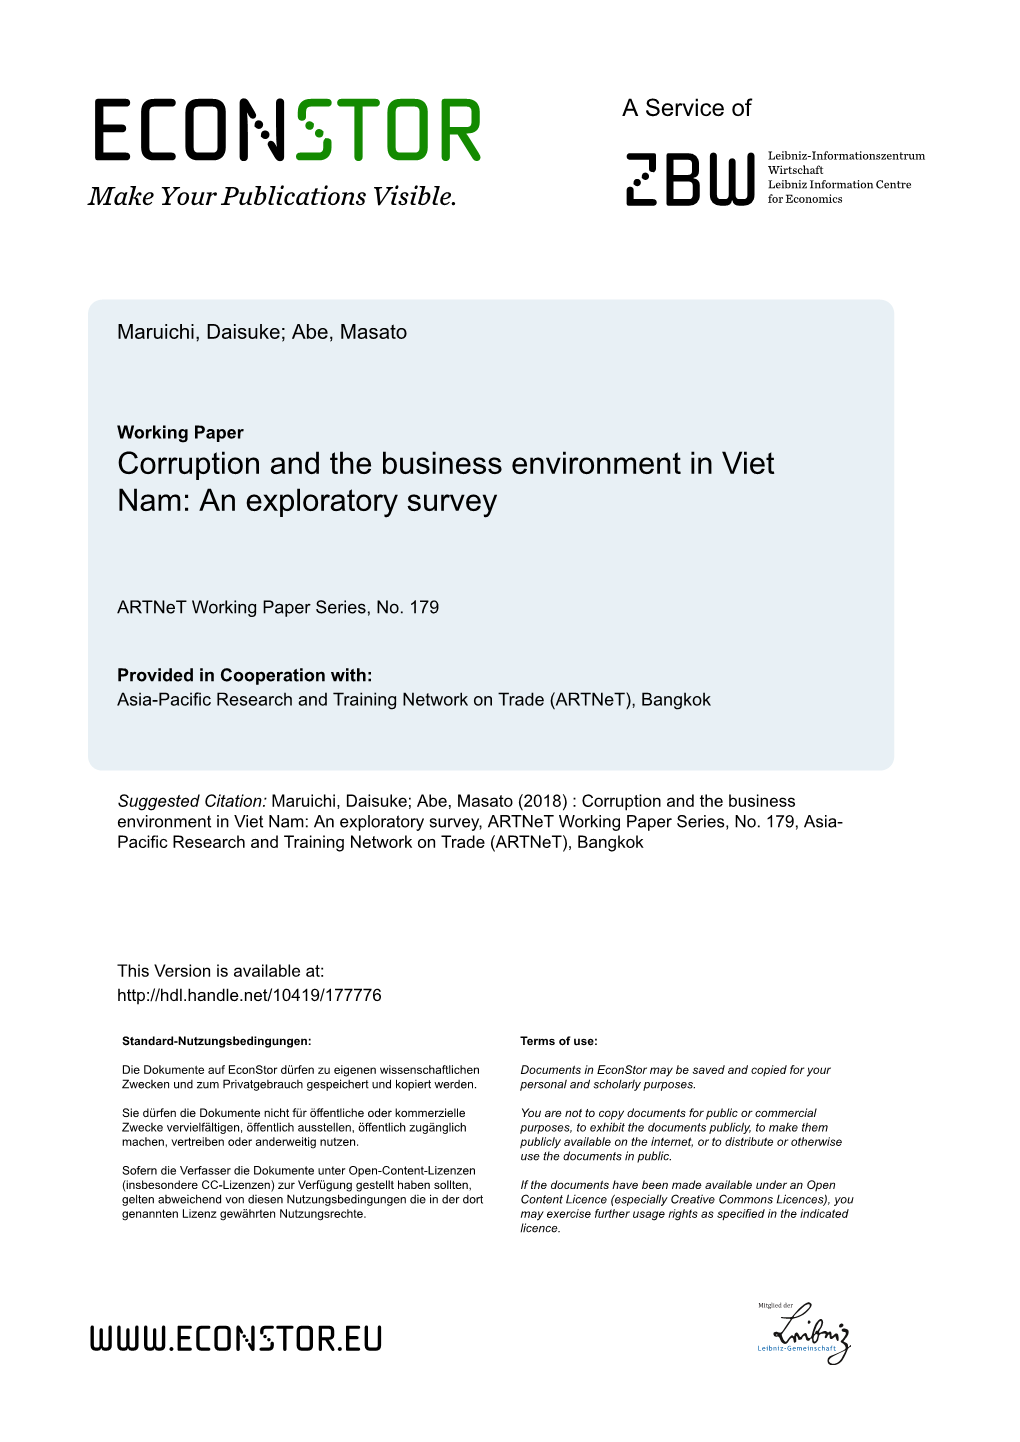 Corruption and the Business Environment in Viet Nam: an Exploratory Survey